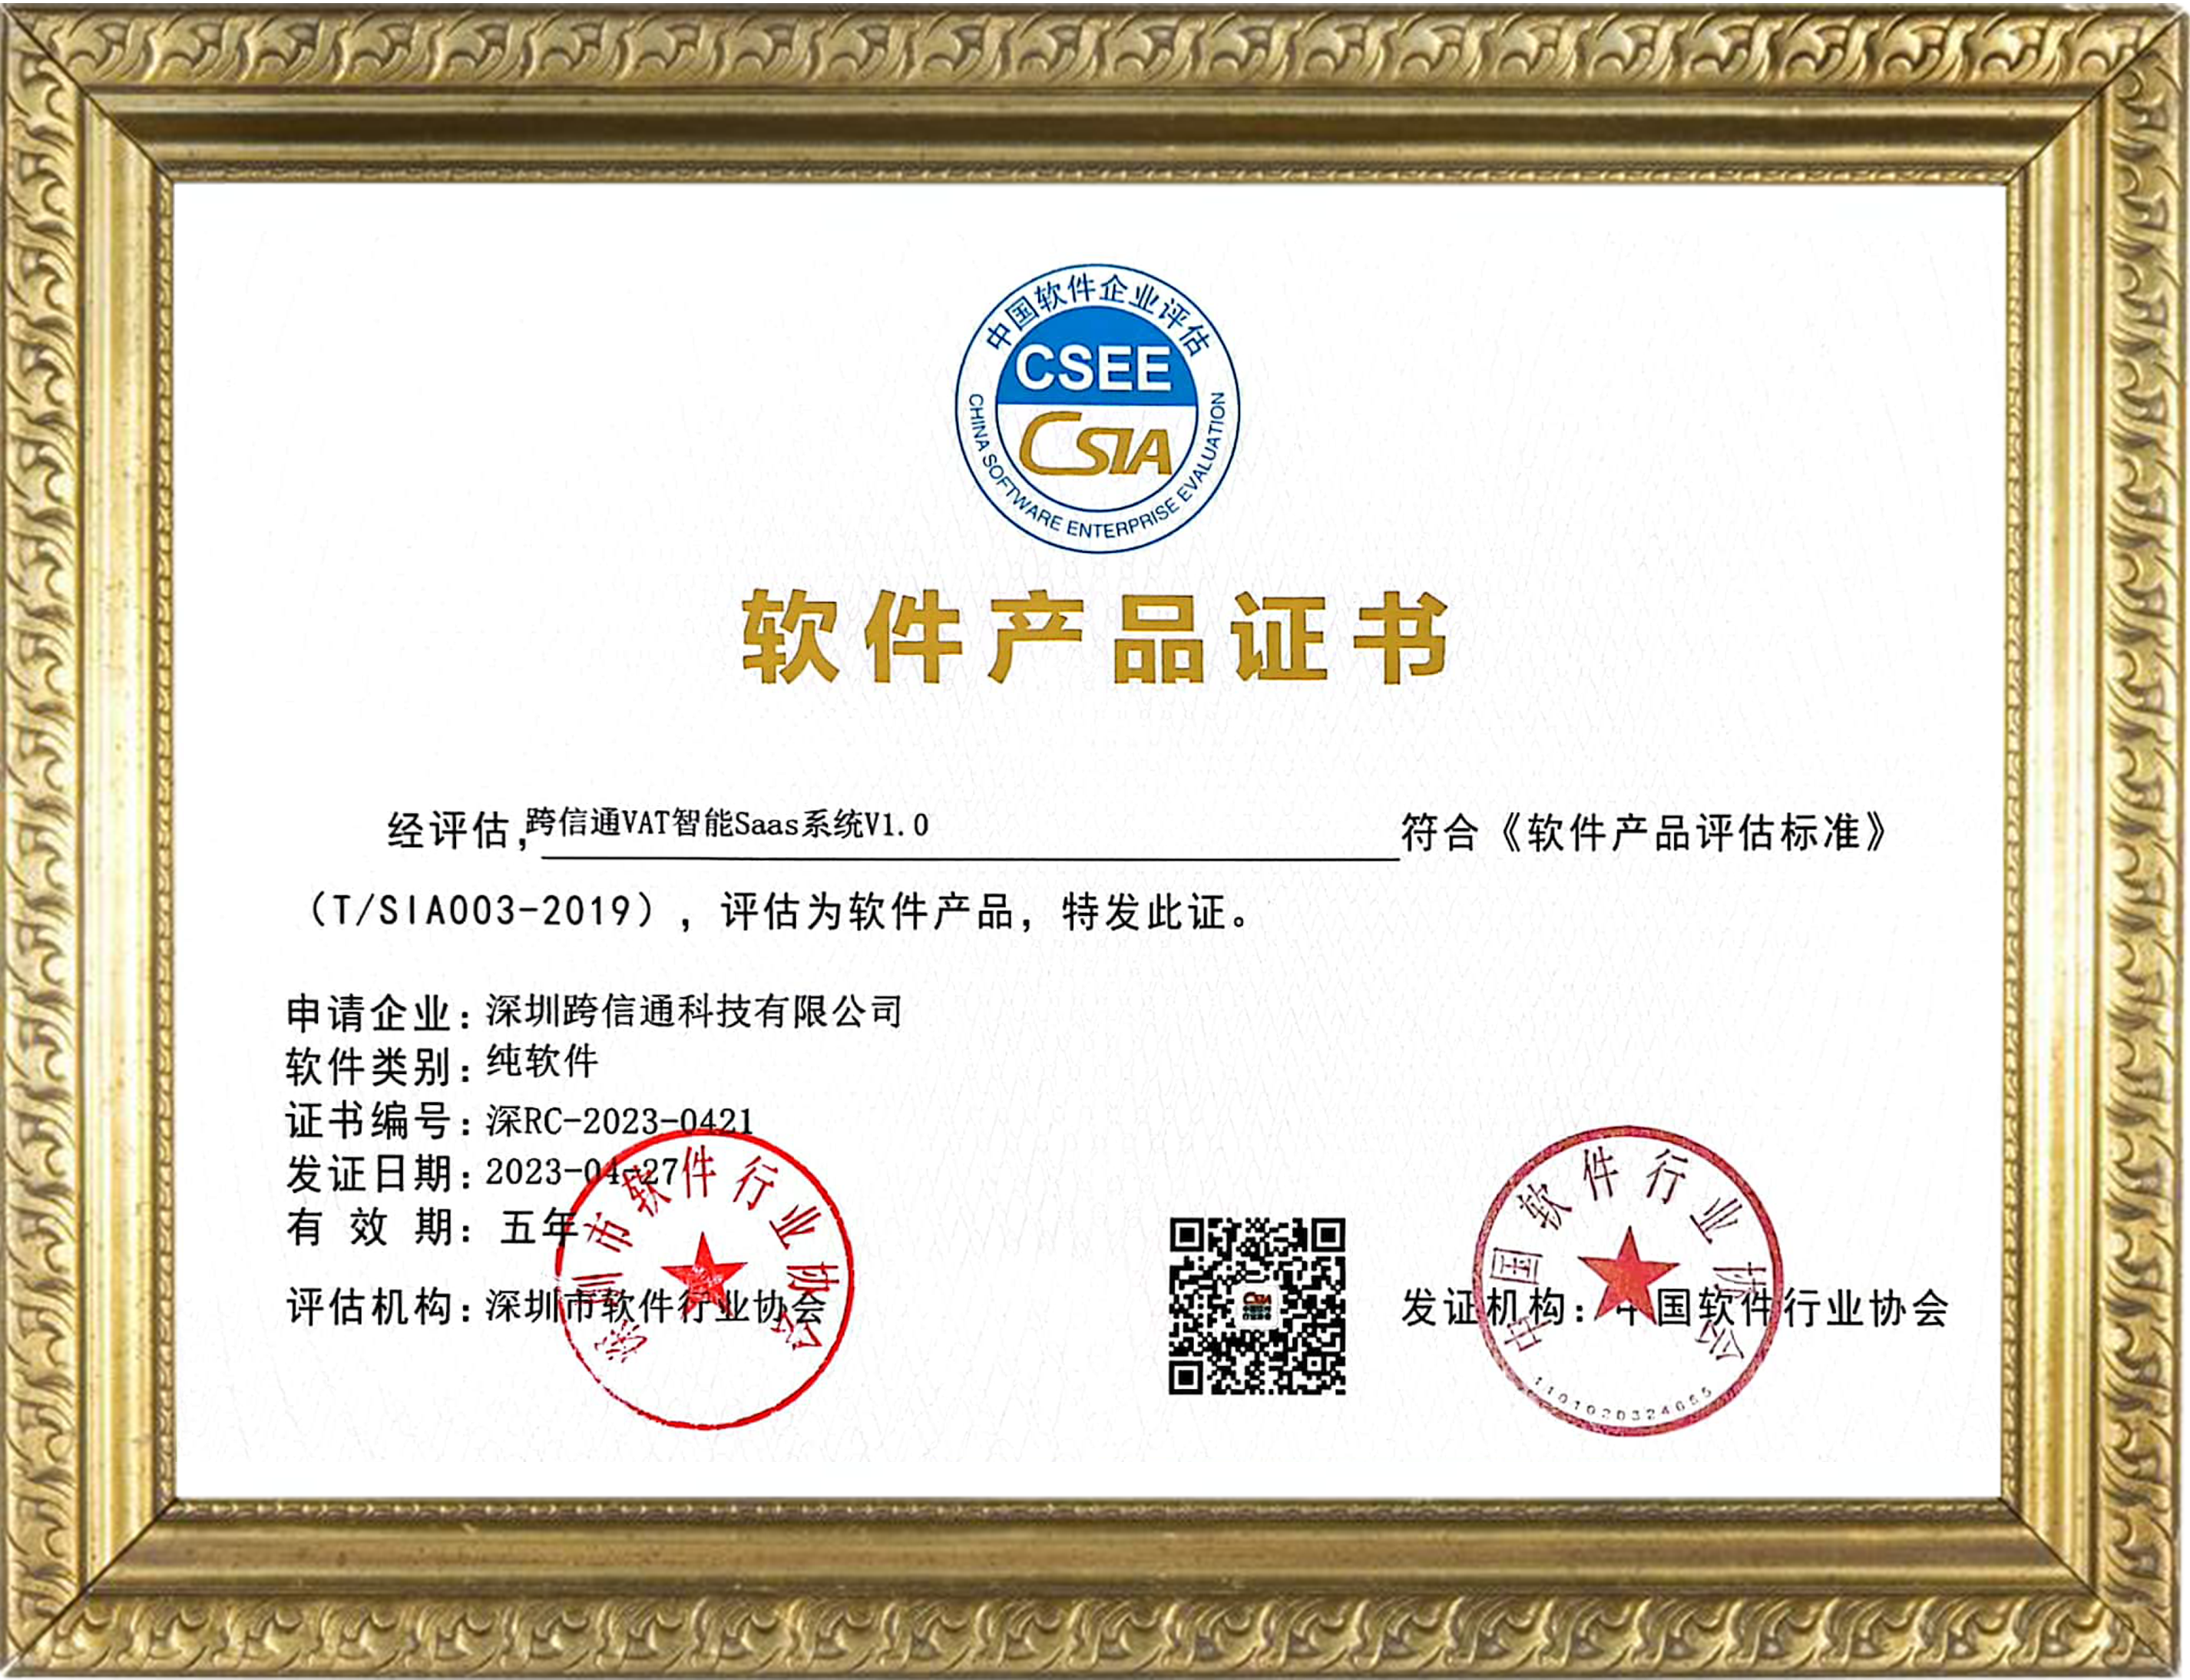 re Product Certificate